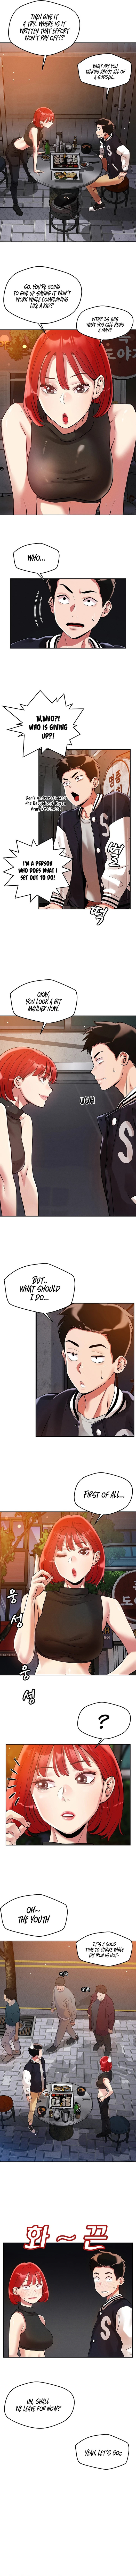 How did we get here Lee Ji-Kyung - Chapter 3 Page 5